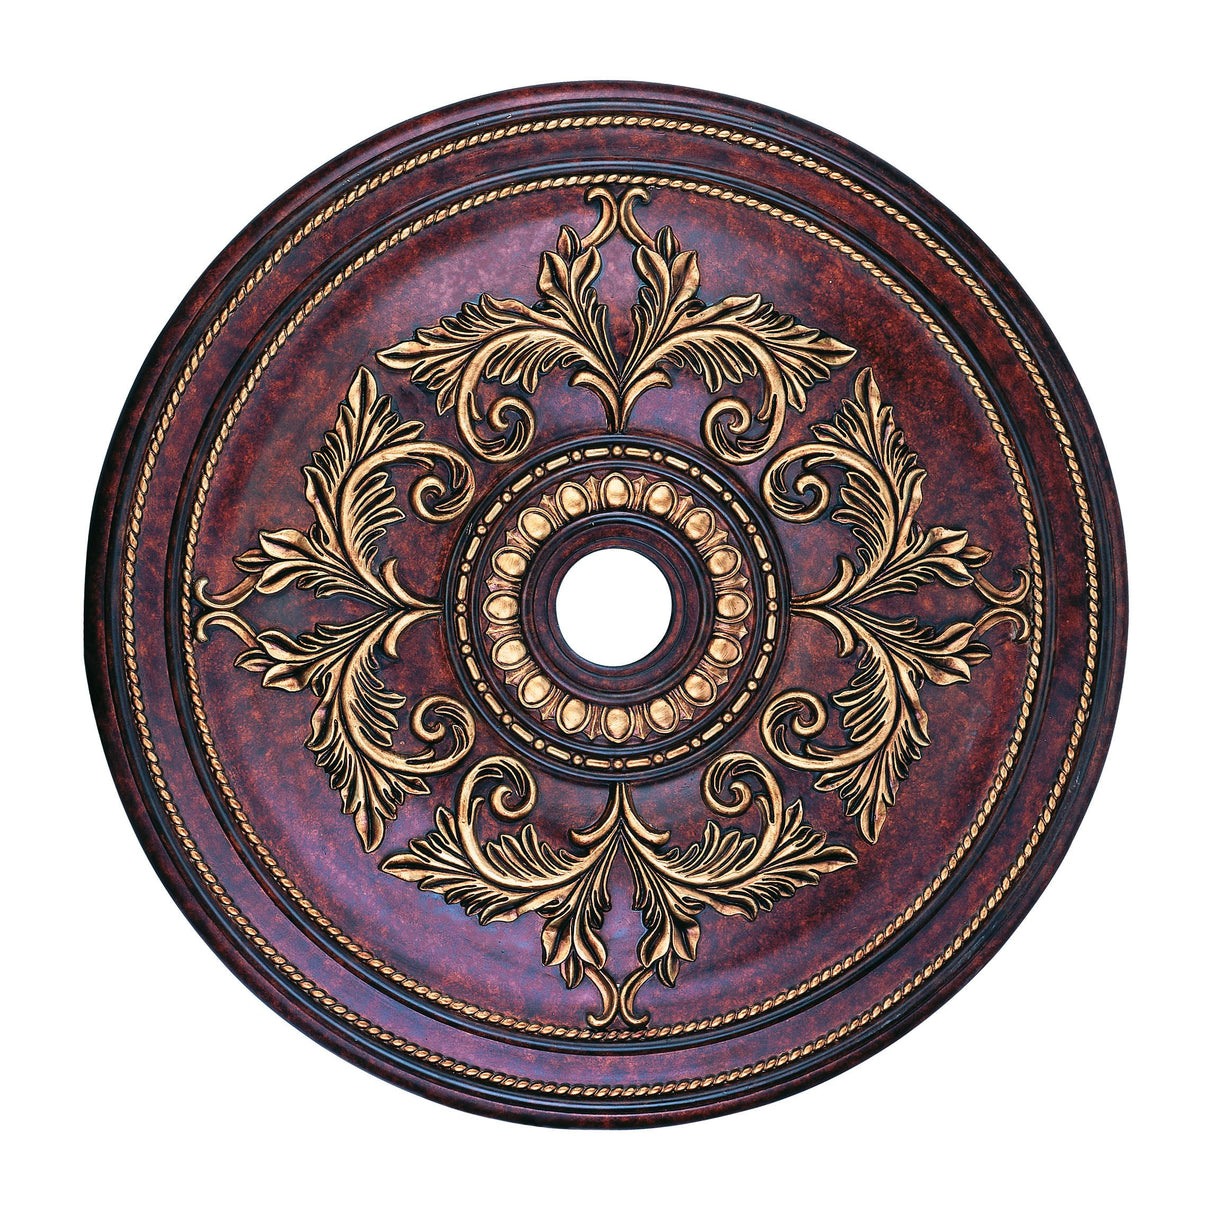 Livex Lighting 8211-63 Ceiling Medallion in Verona Bronze with Aged Gold Leaf Accents